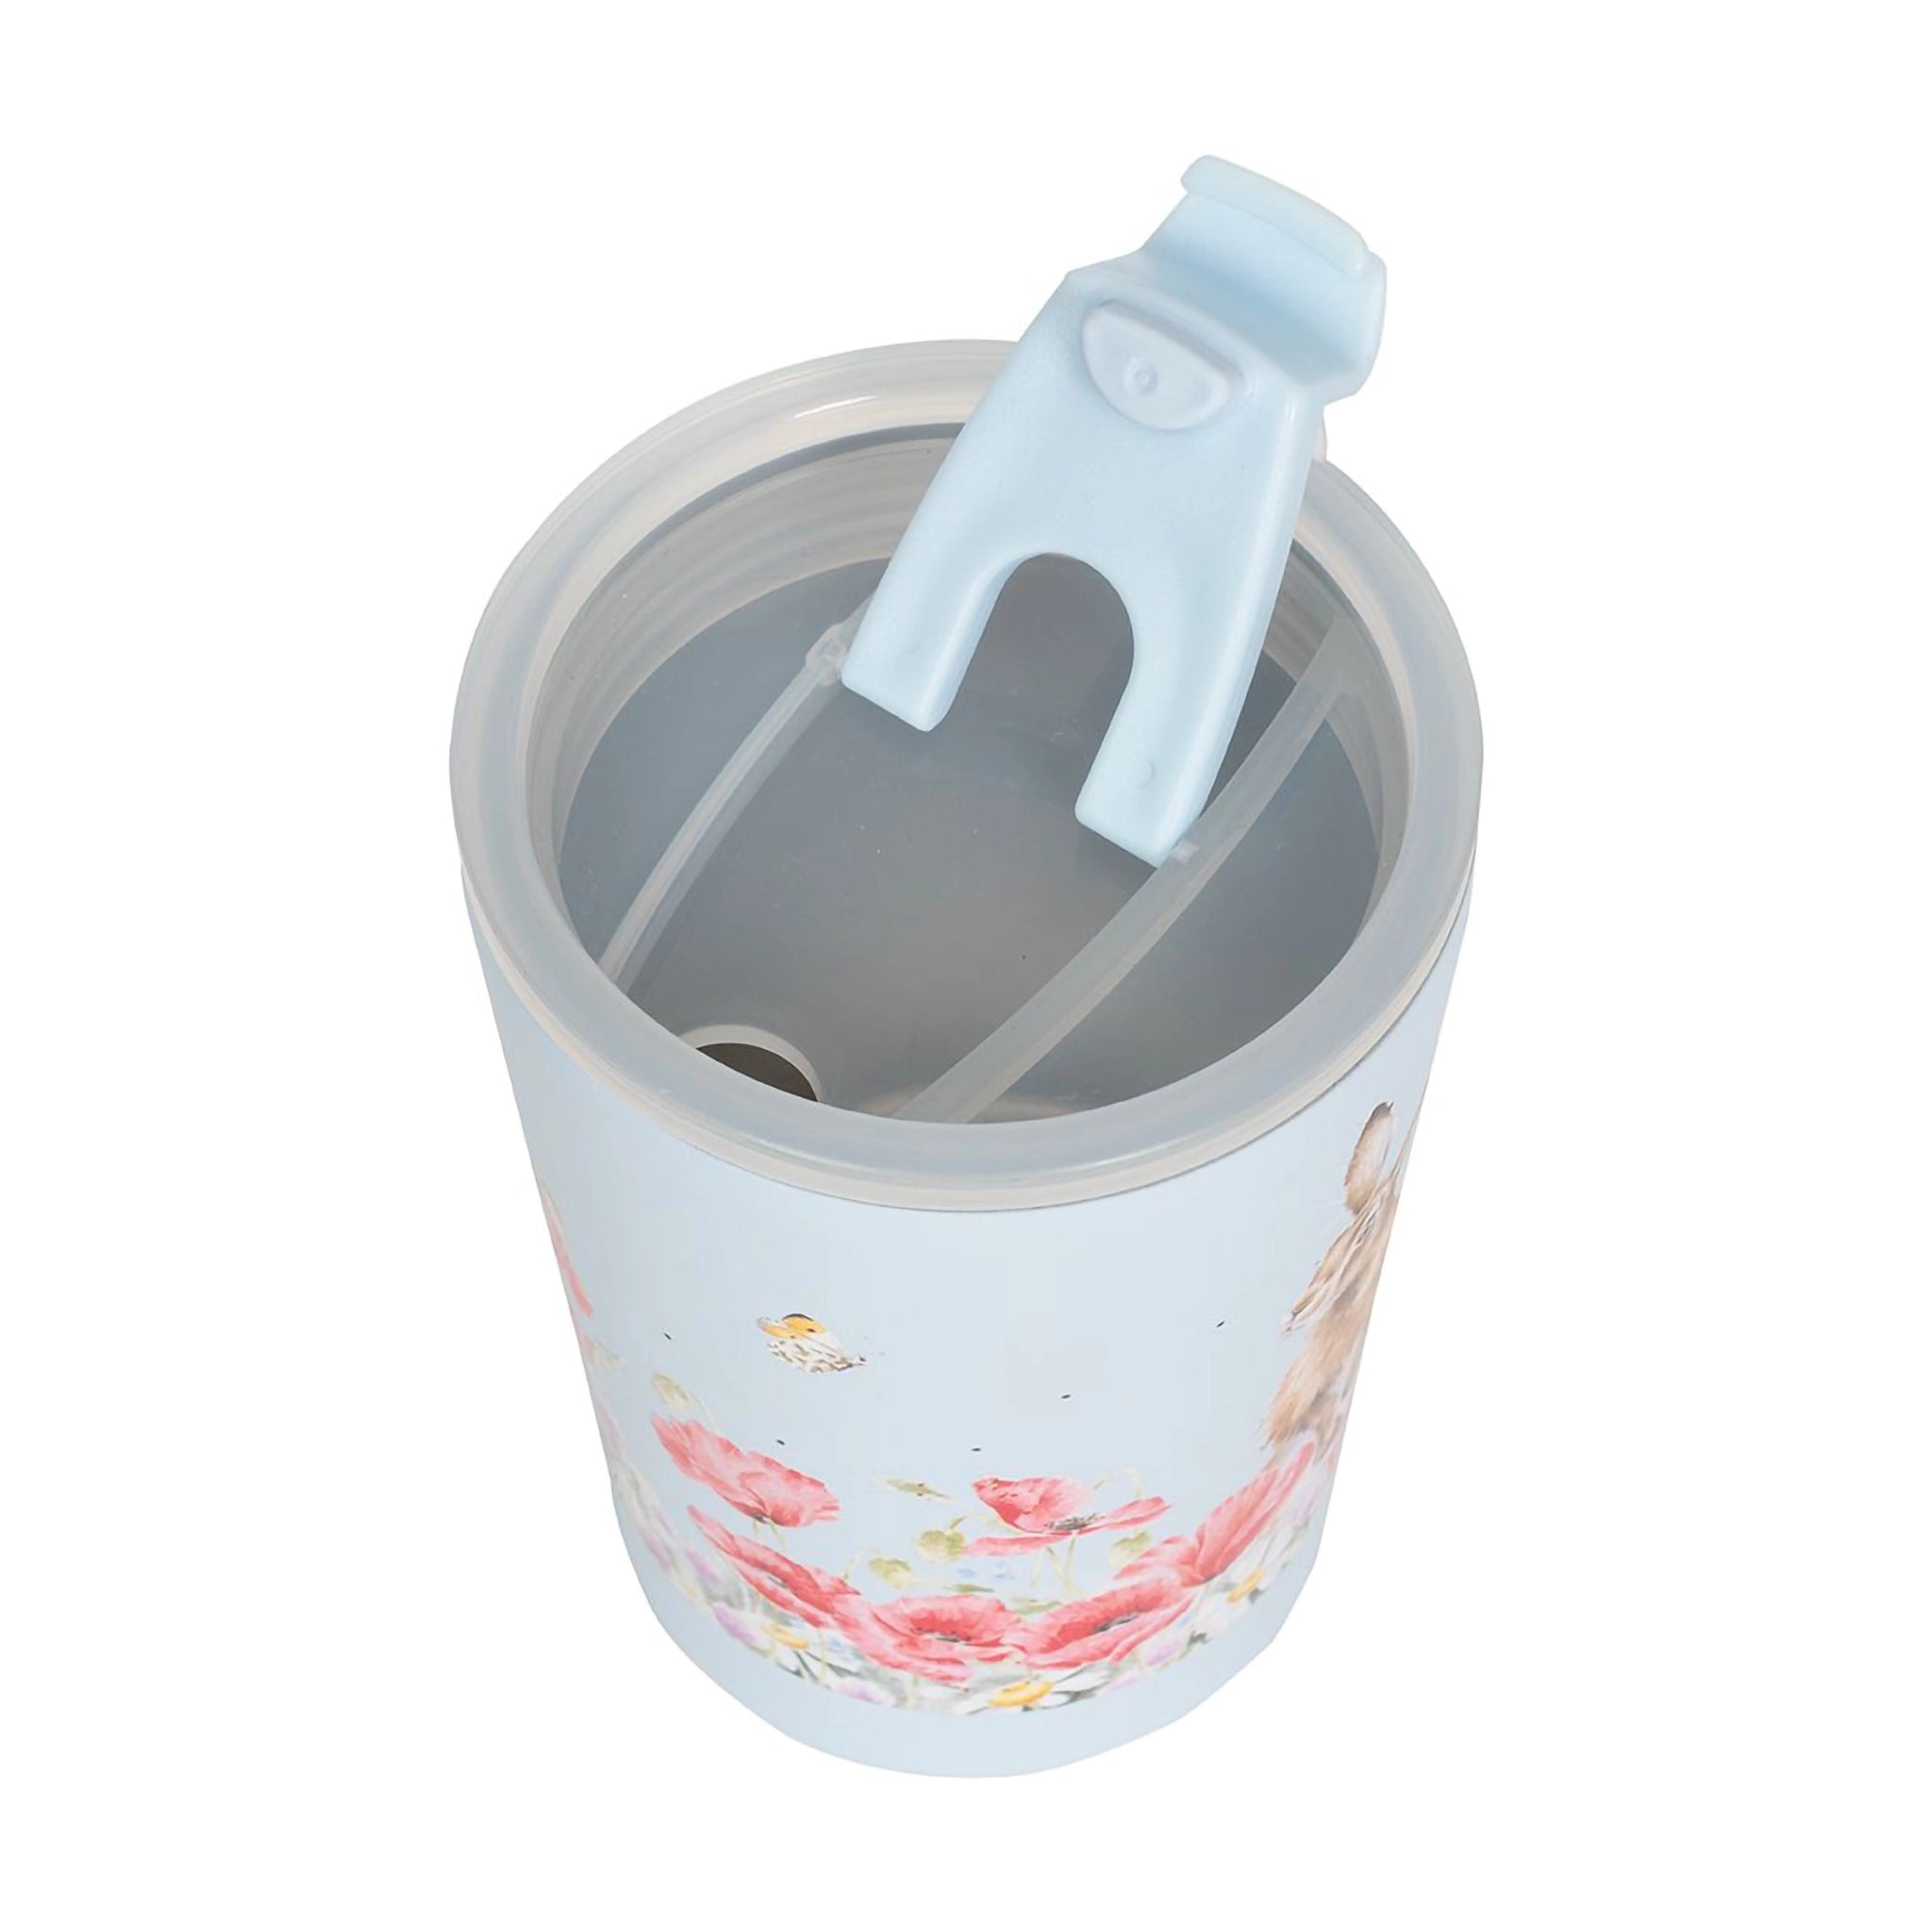 Frosted lid of a travel cup with a hare in flowers design in a light blue